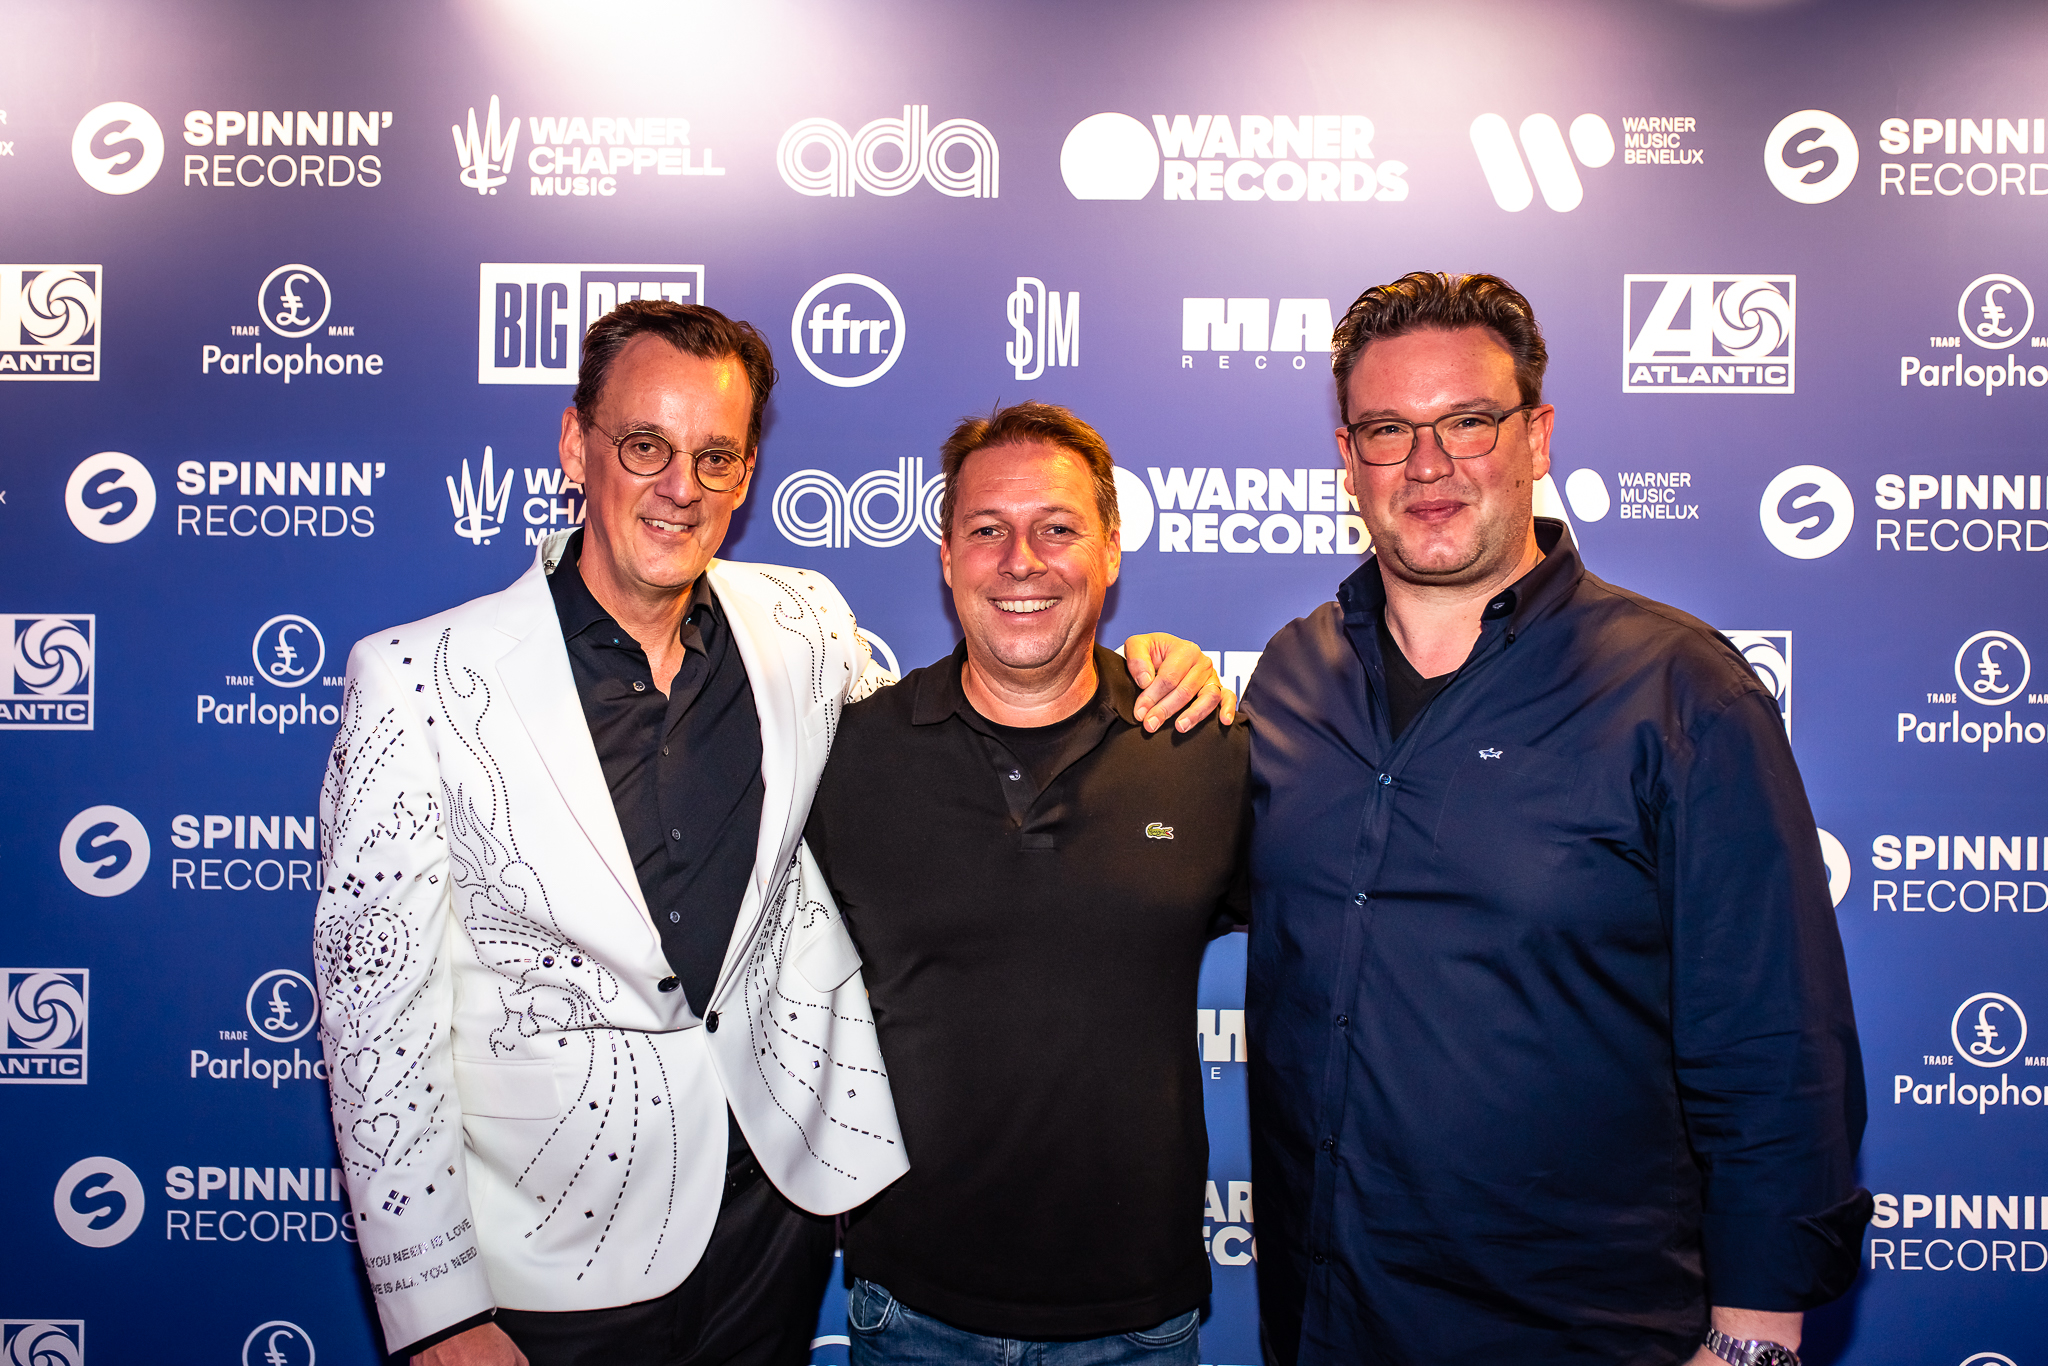 WARNER MUSIC BENELUX, SPINNIN' RECORDS, WARNER CHAPPELL MUSIC BENELUX  REVEAL NEW CREATIVE SPACE IN THE HEART OF AMSTERDAM - Warner Music Group